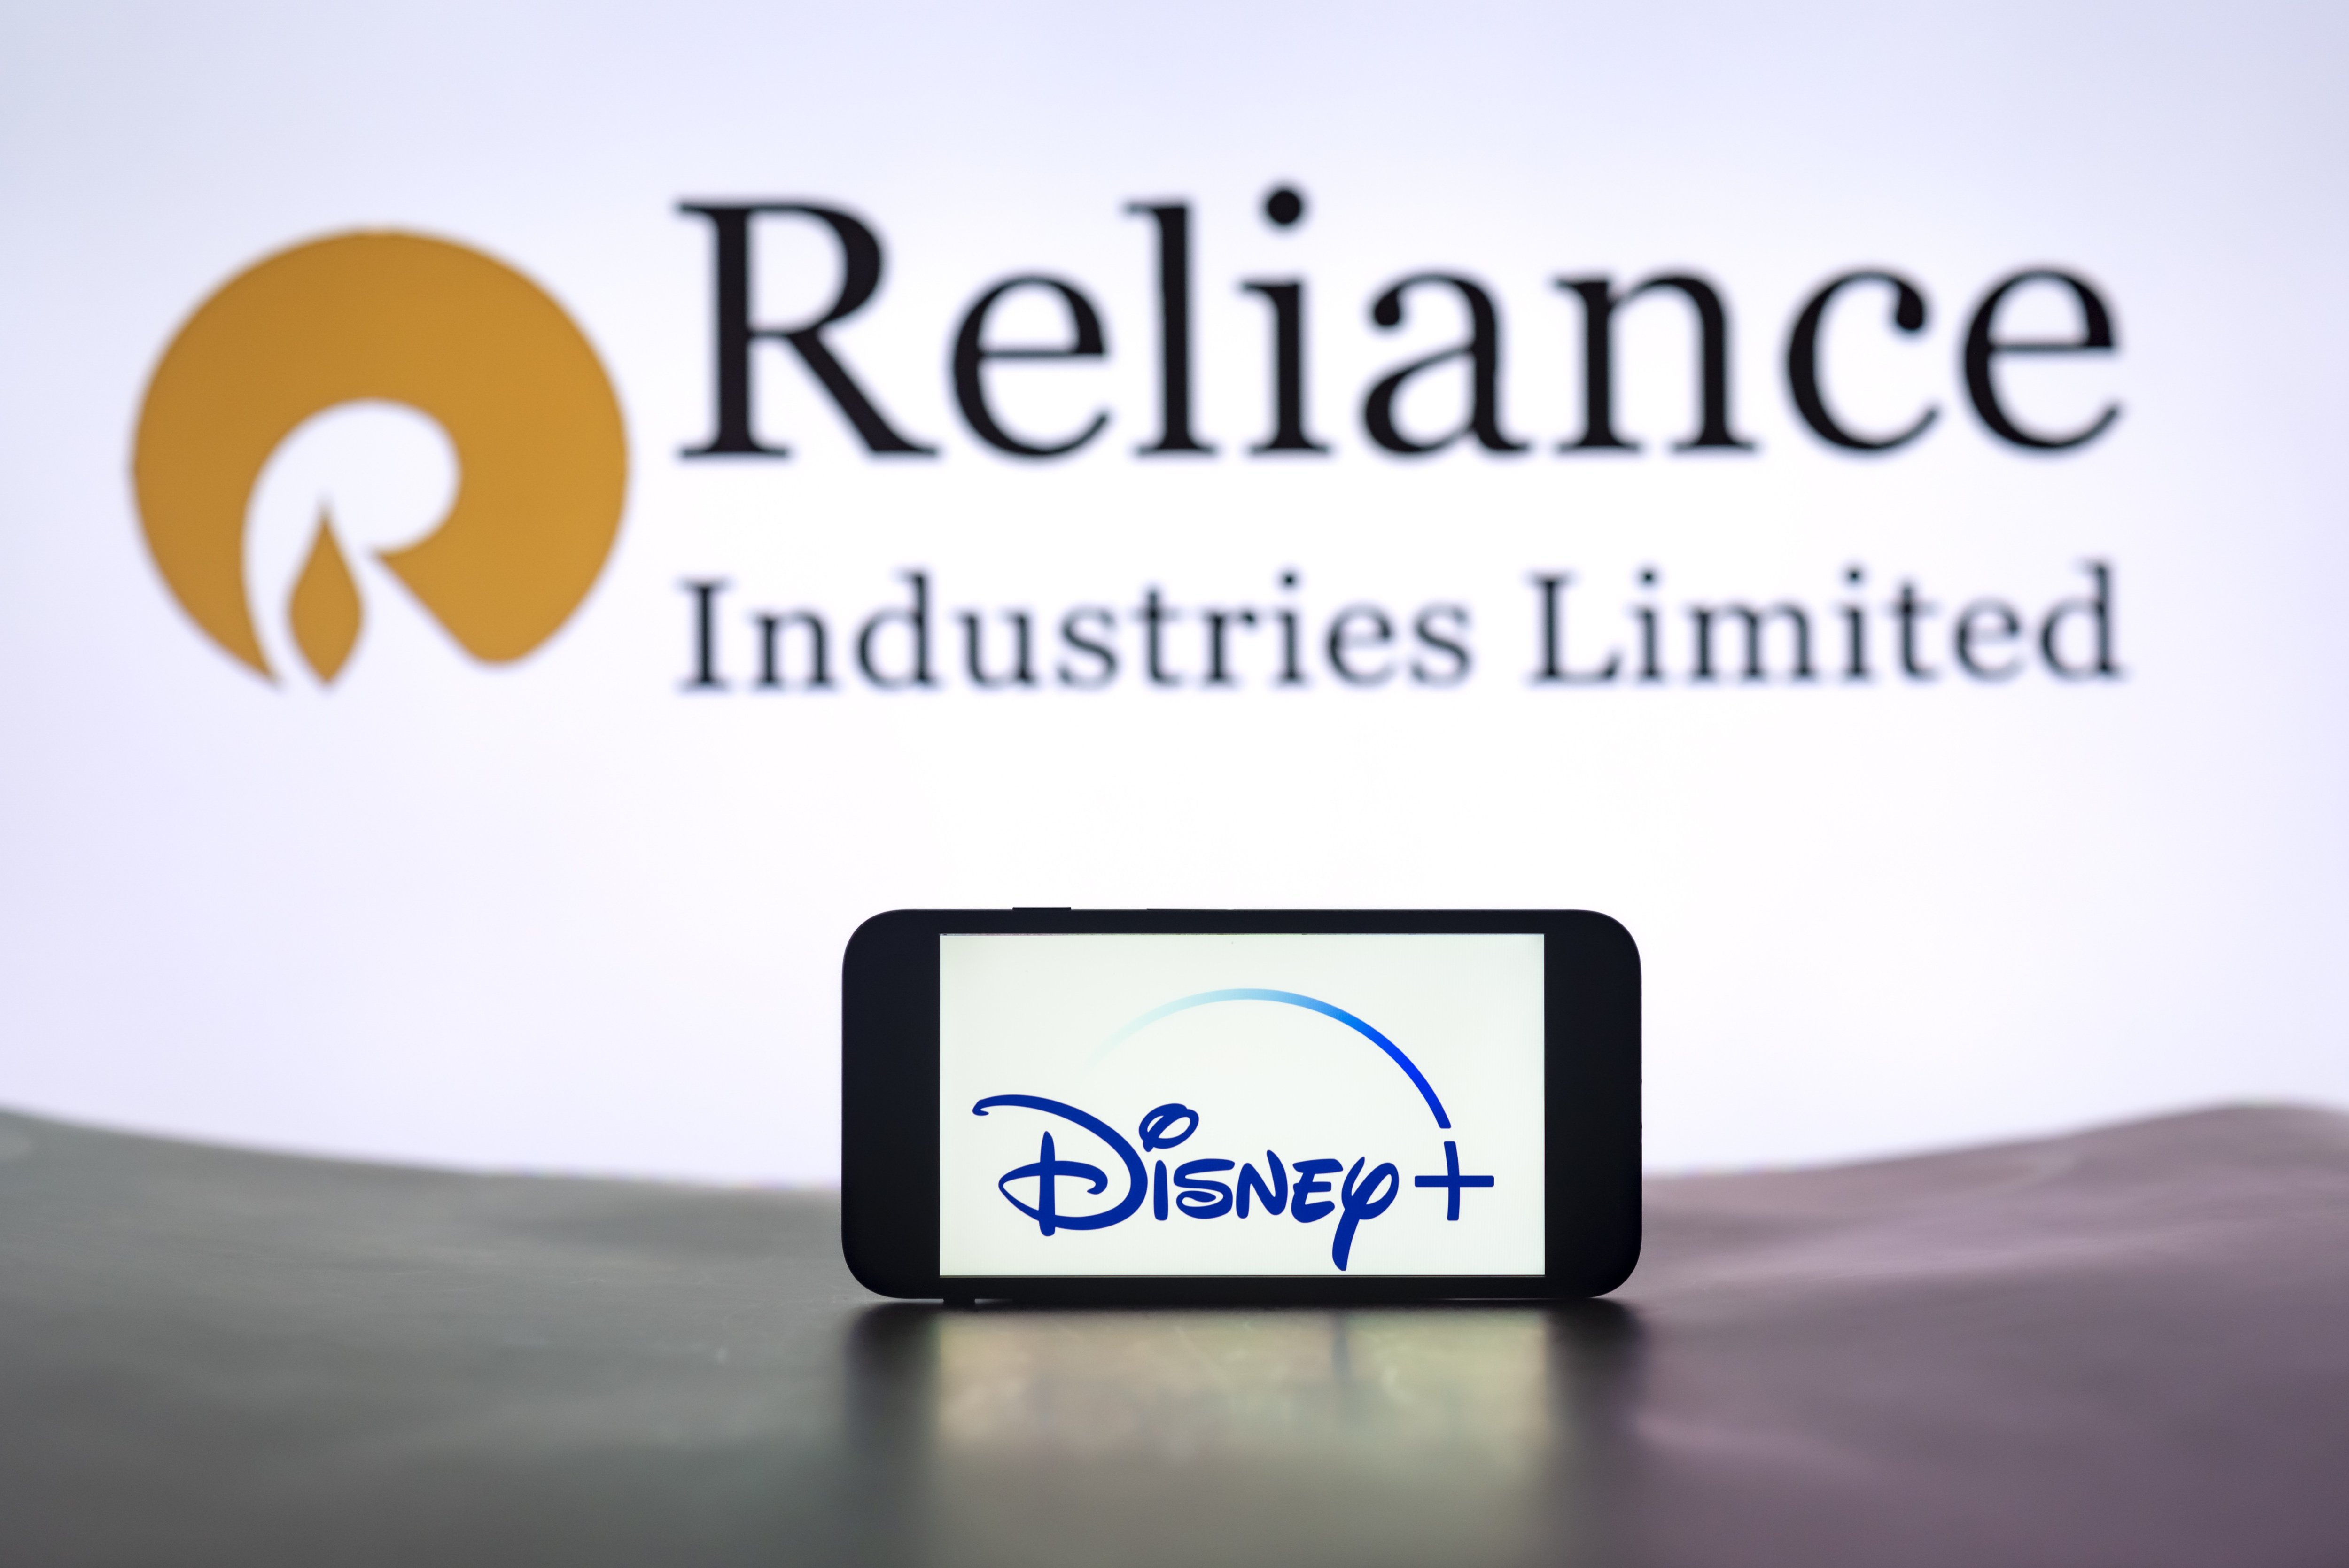 Disney and Reliance to Merge India Media Operations